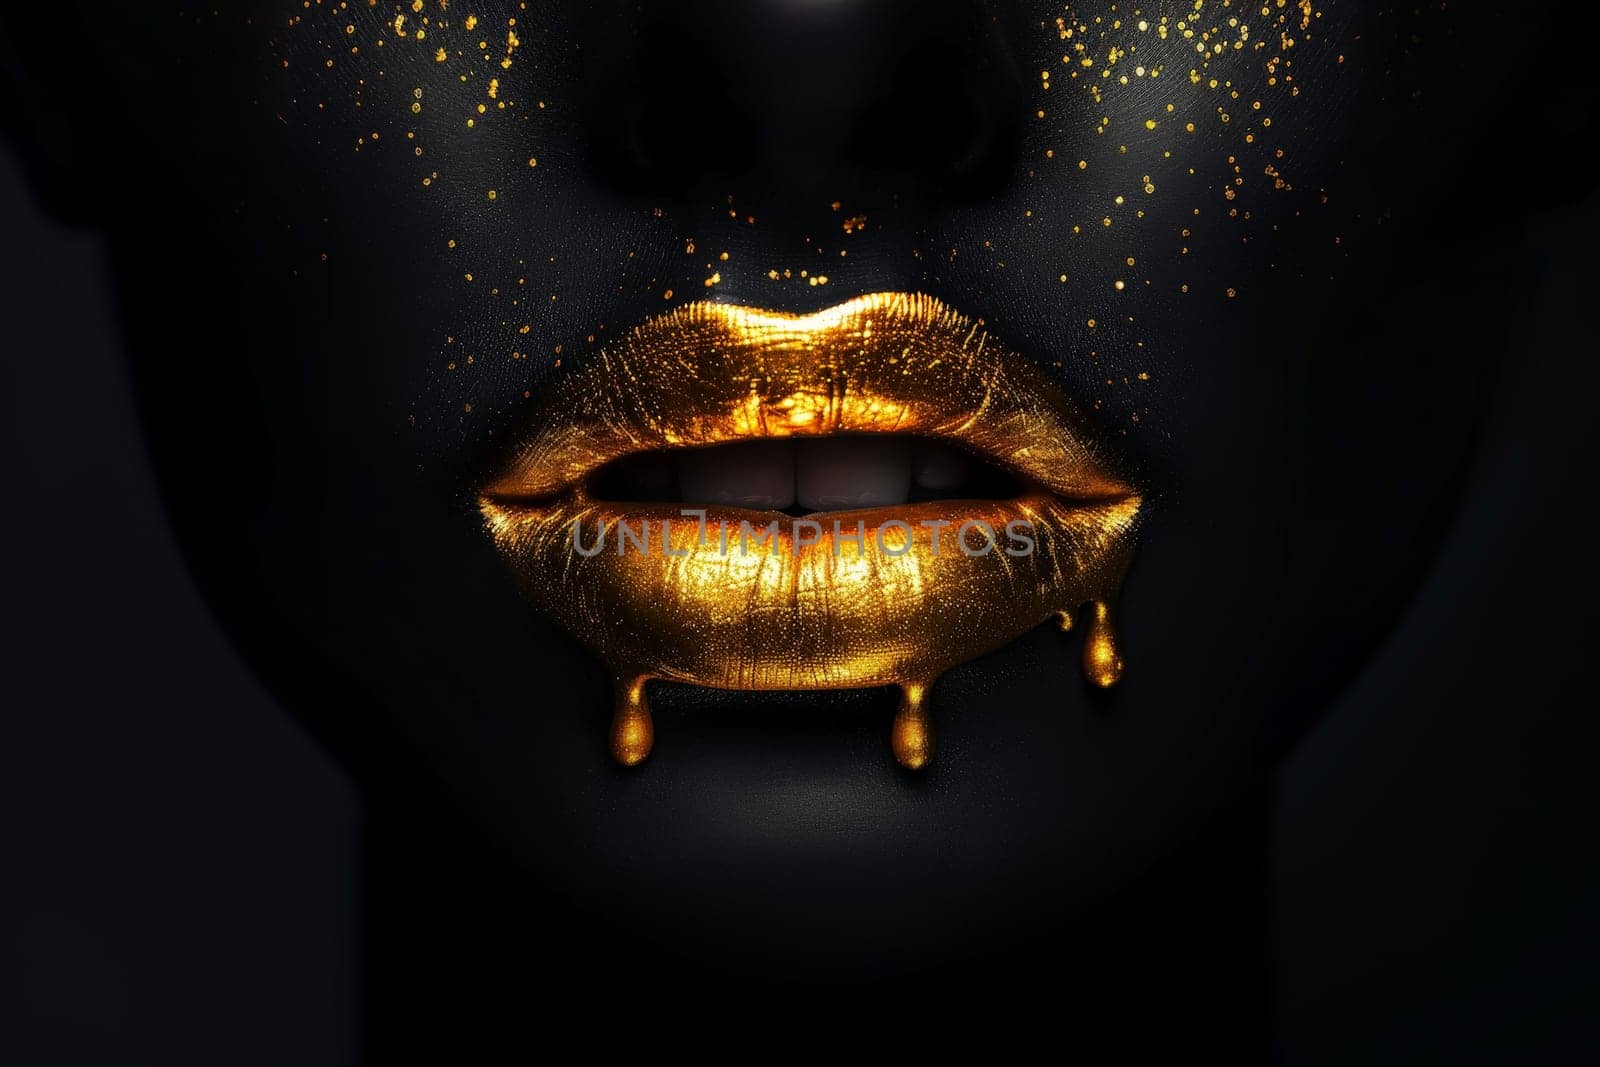 A woman's face is covered in gold glitter, with a gold lip gloss dripping down her face. The image is a work of art, with a bold and glamorous feel